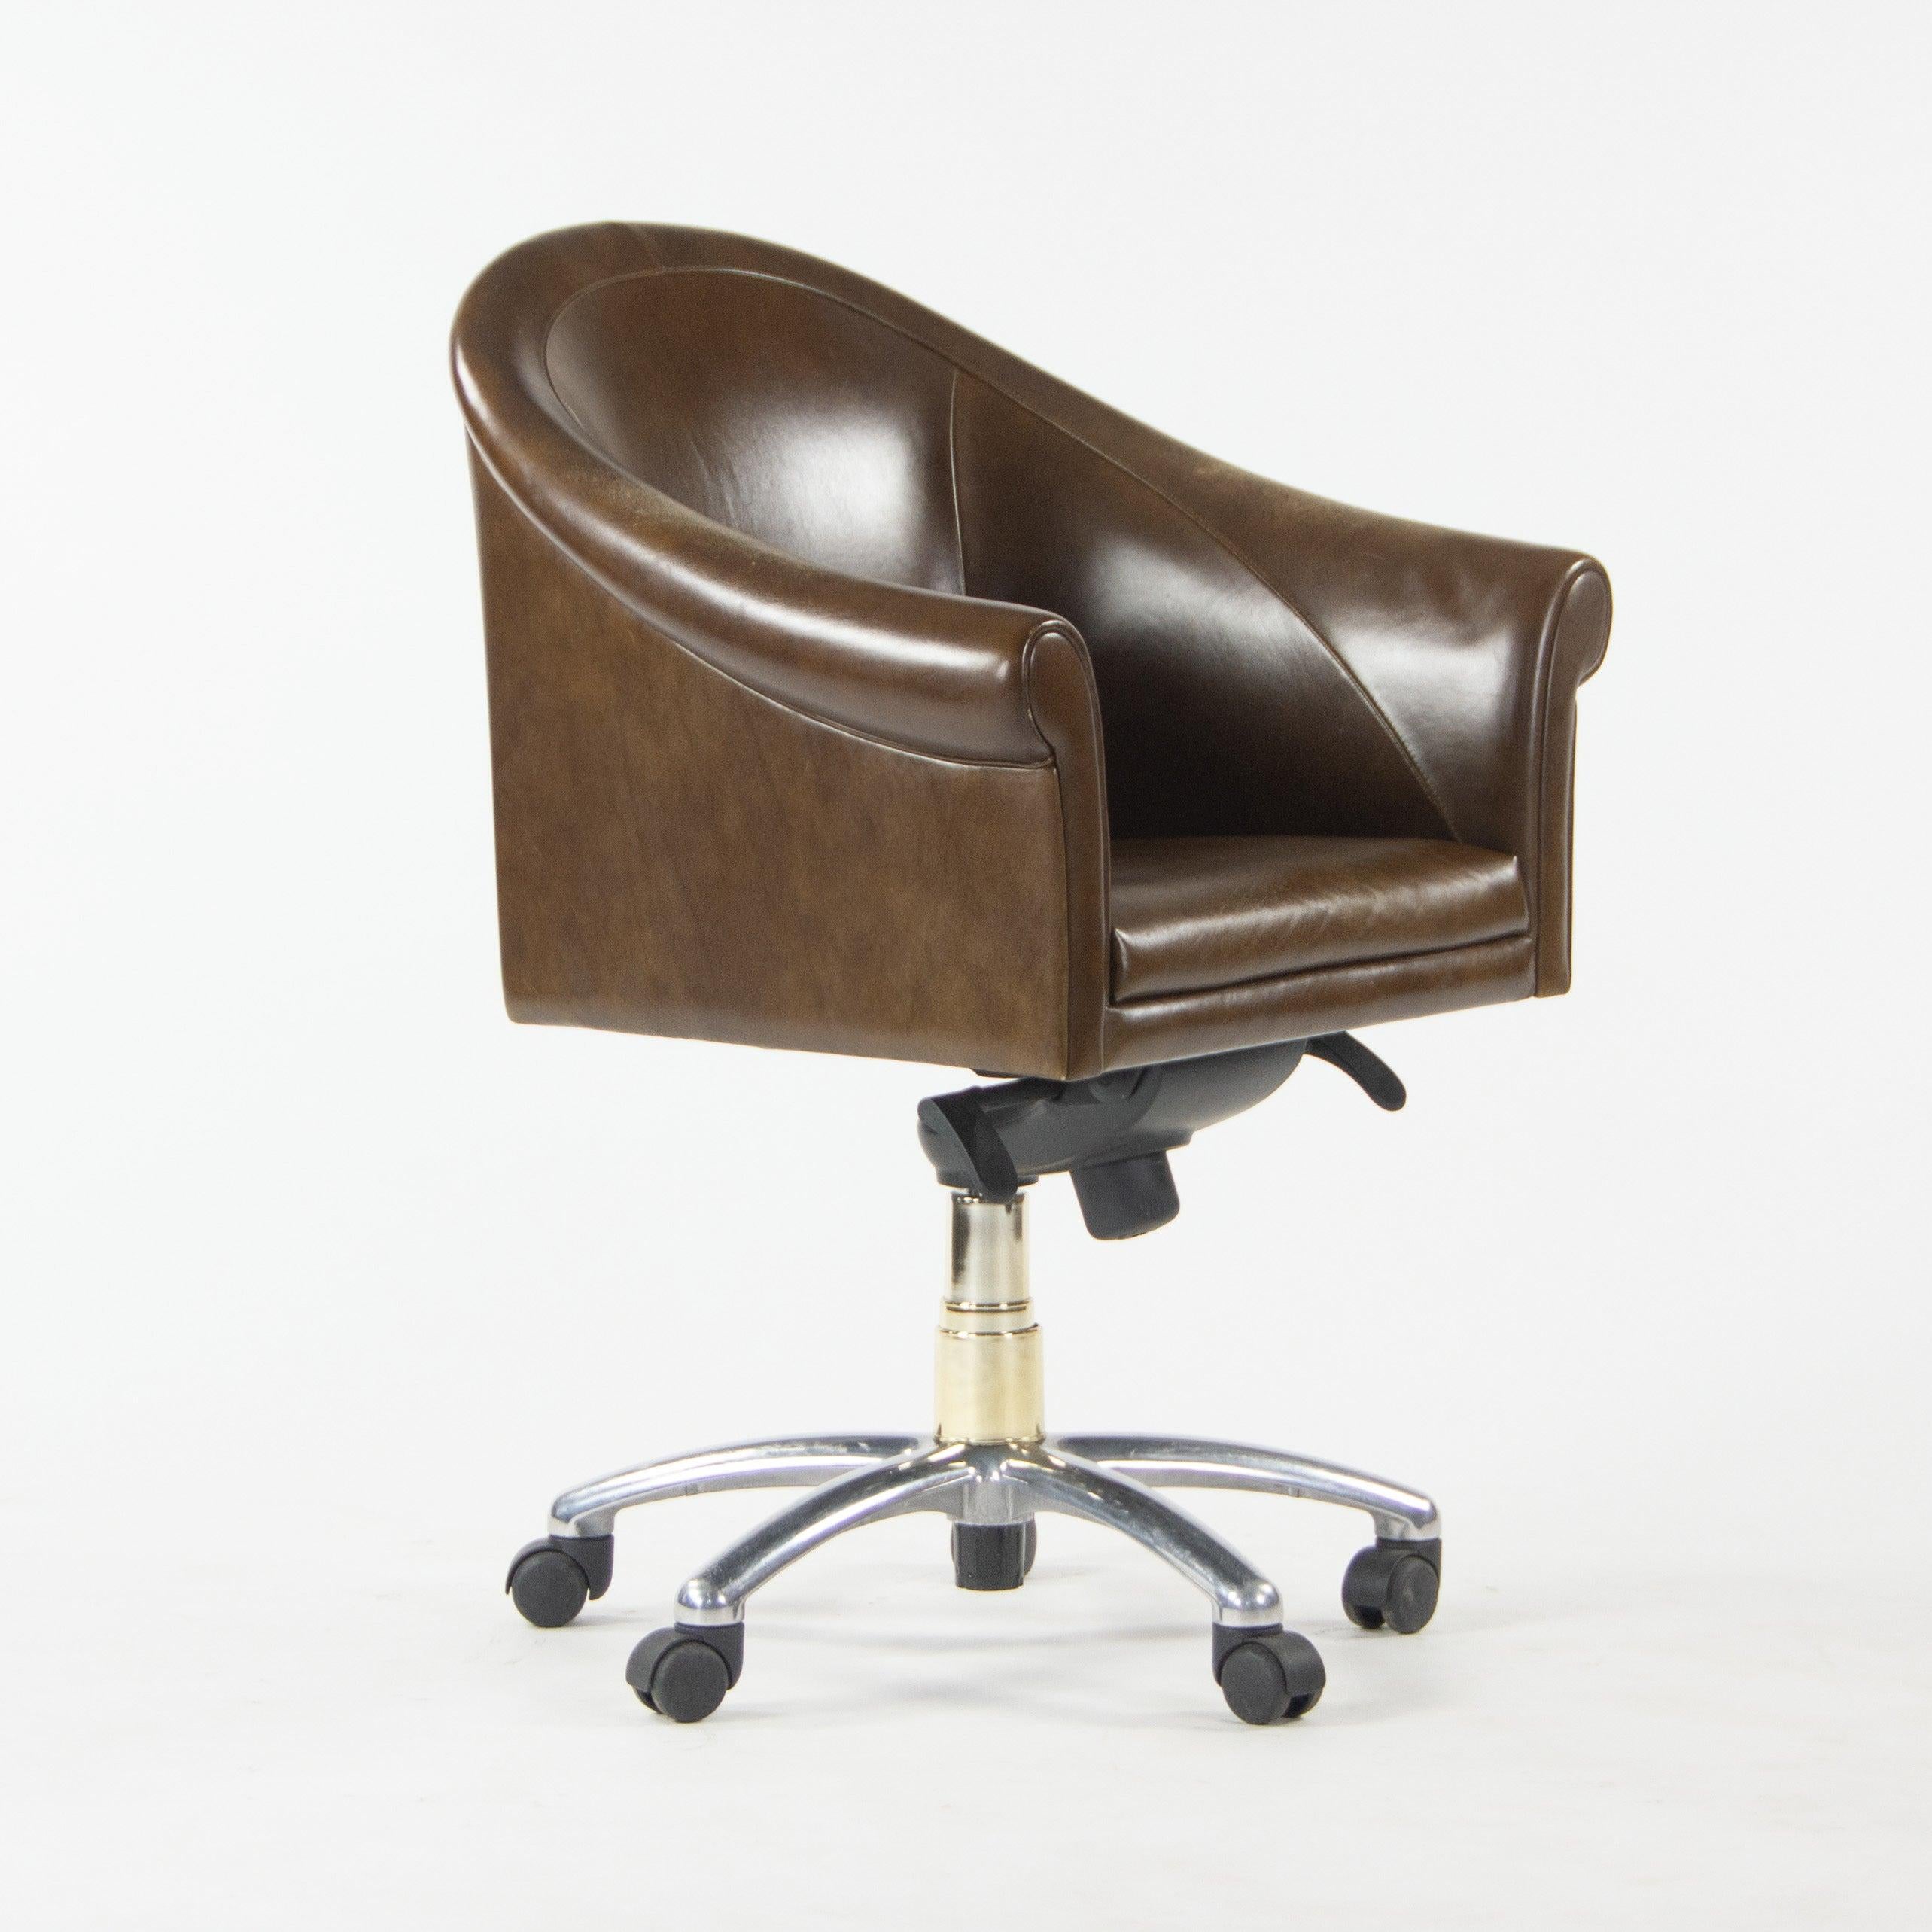 Listed for sale is a set of (sold separately) Poltrona Frau office/desk chair on rolling casters. This is part of Poltrona Frau's Sinan collection, designed by Luca Scacchetti. 
This example is featured in a brown leather. The chairs are in very